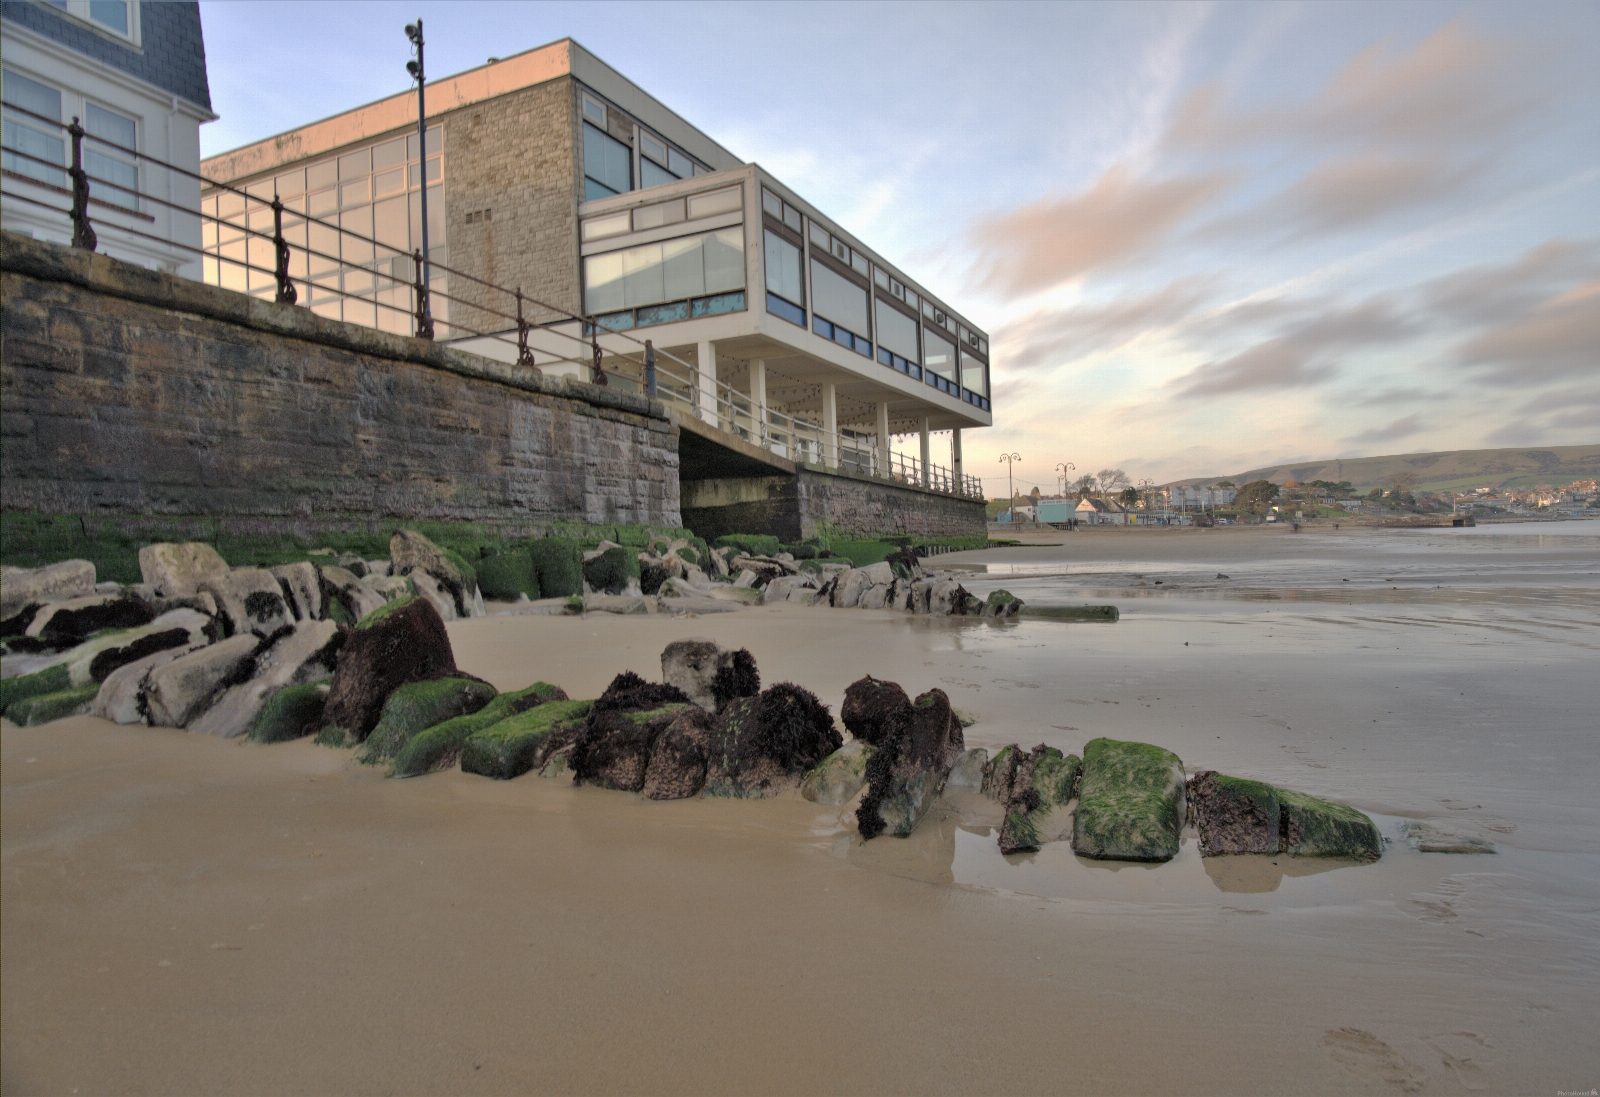 Image of Swanage Beach by michael bennett